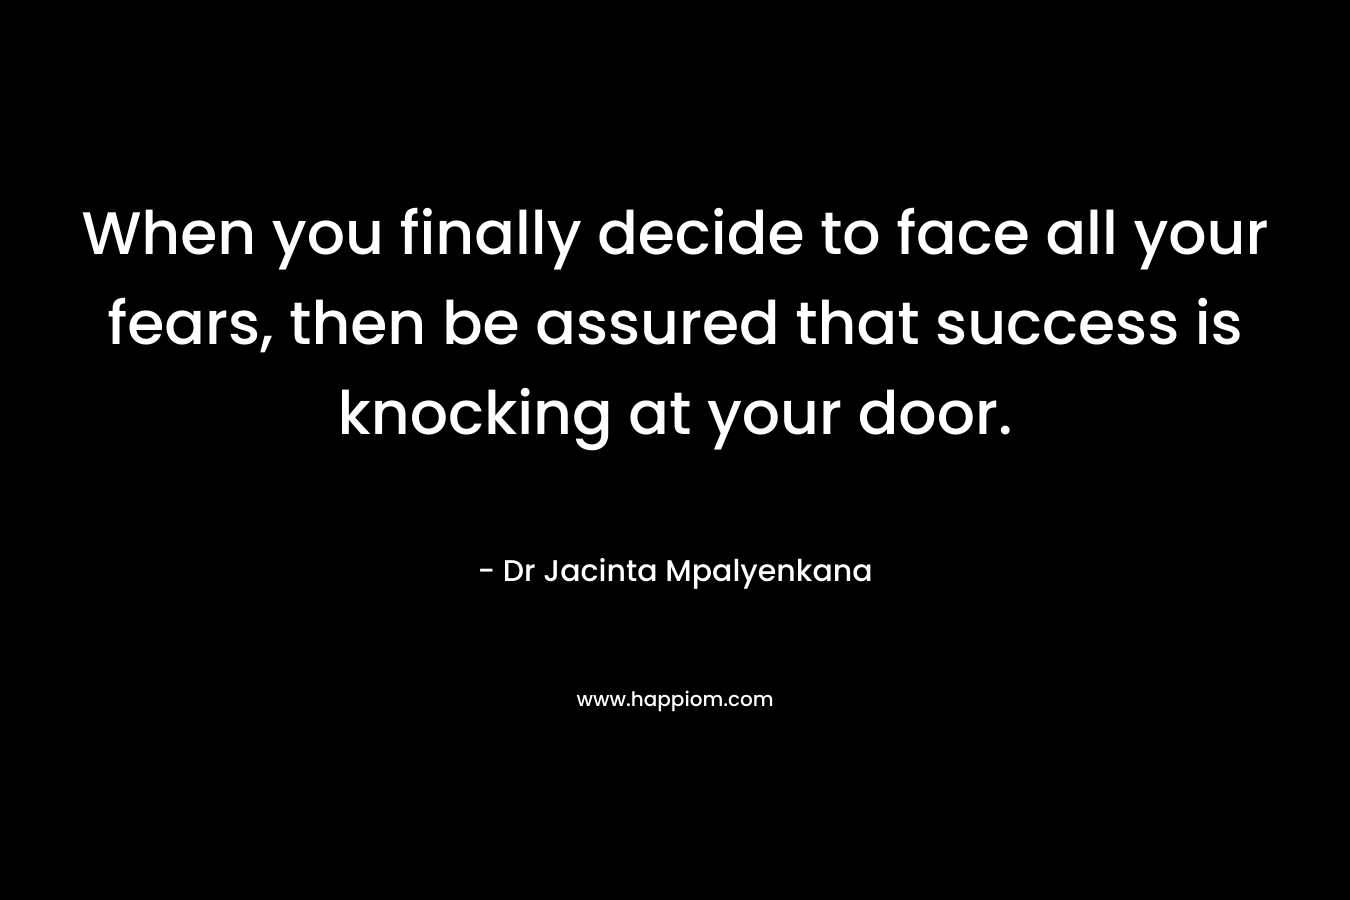 When you finally decide to face all your fears, then be assured that success is knocking at your door. – Dr Jacinta Mpalyenkana